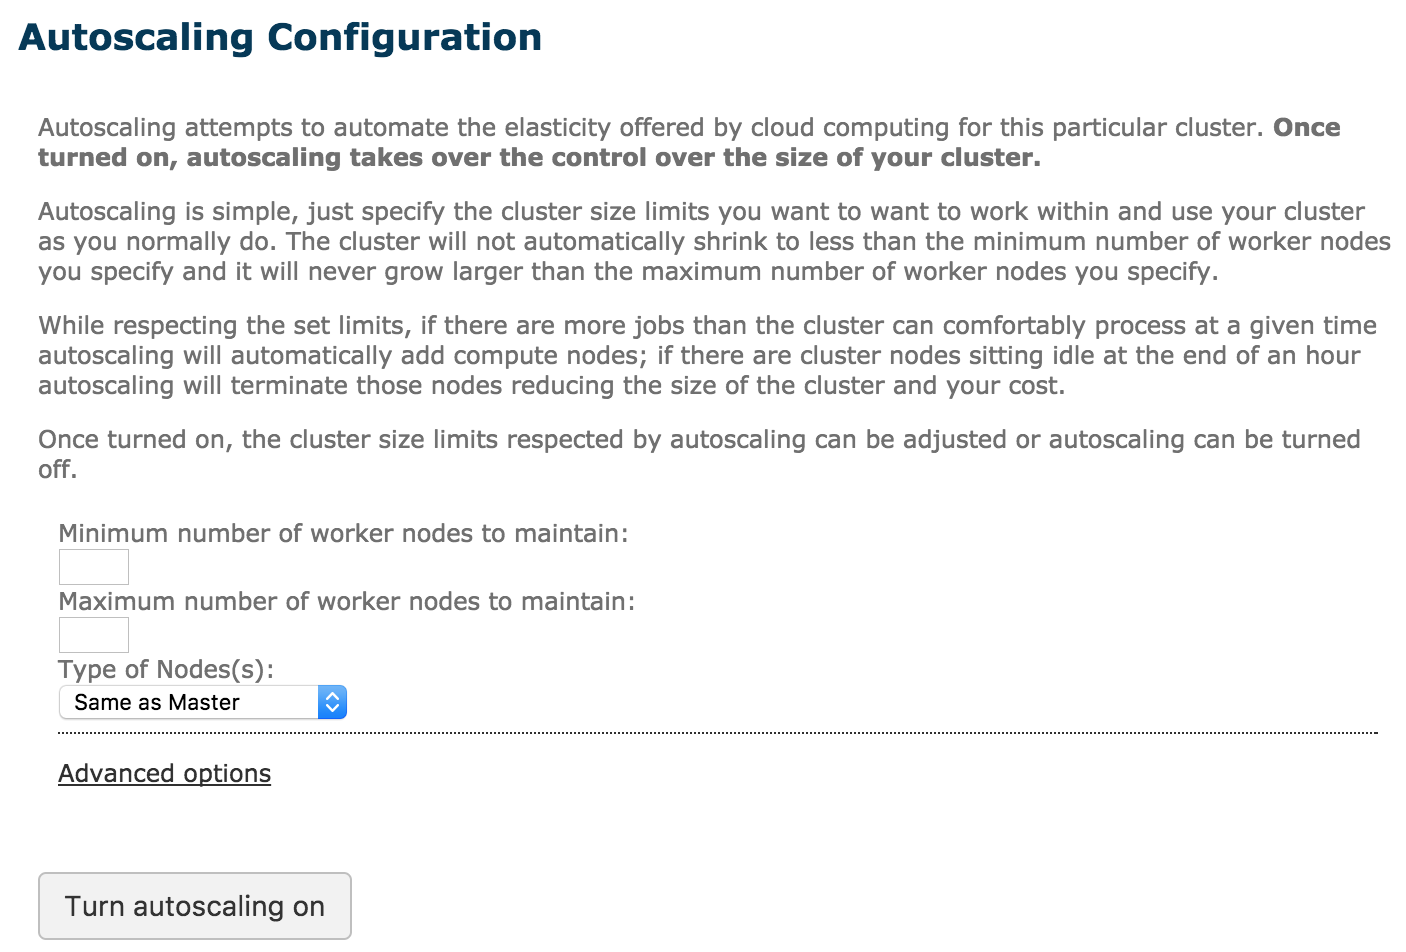 Screenshot of cloudman autoscaling configuration with a minimum and maximum number of worker nodes to maintain.